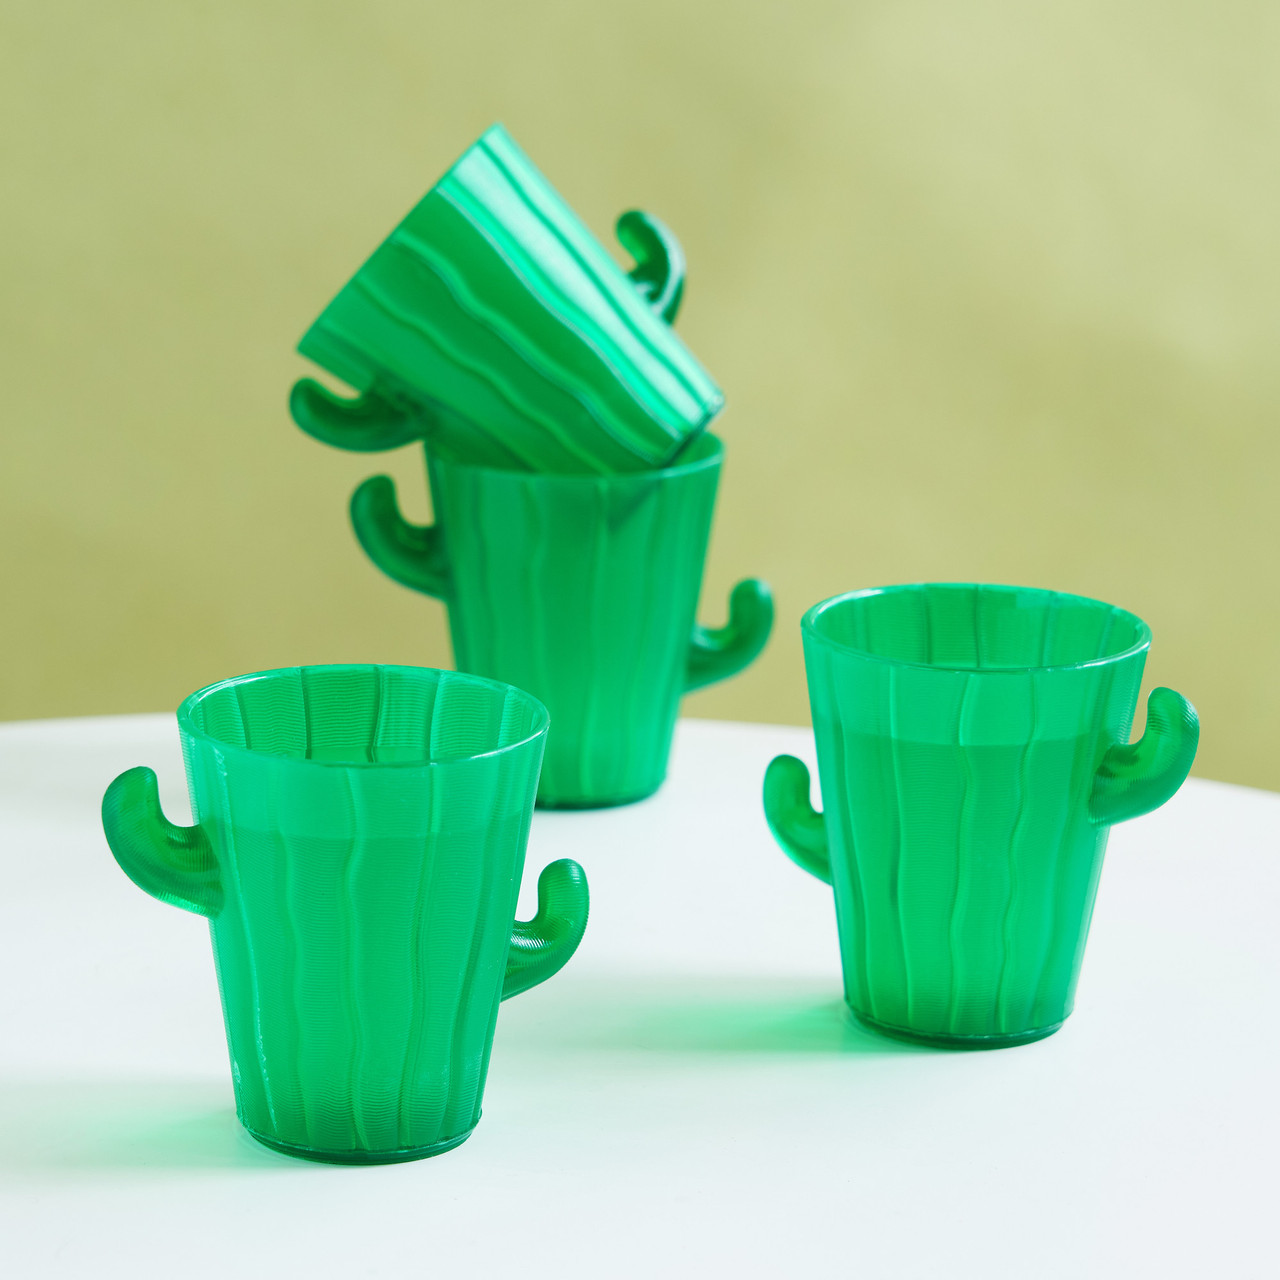 Cactus Shot Glasses, Set of 4 by True Zoo